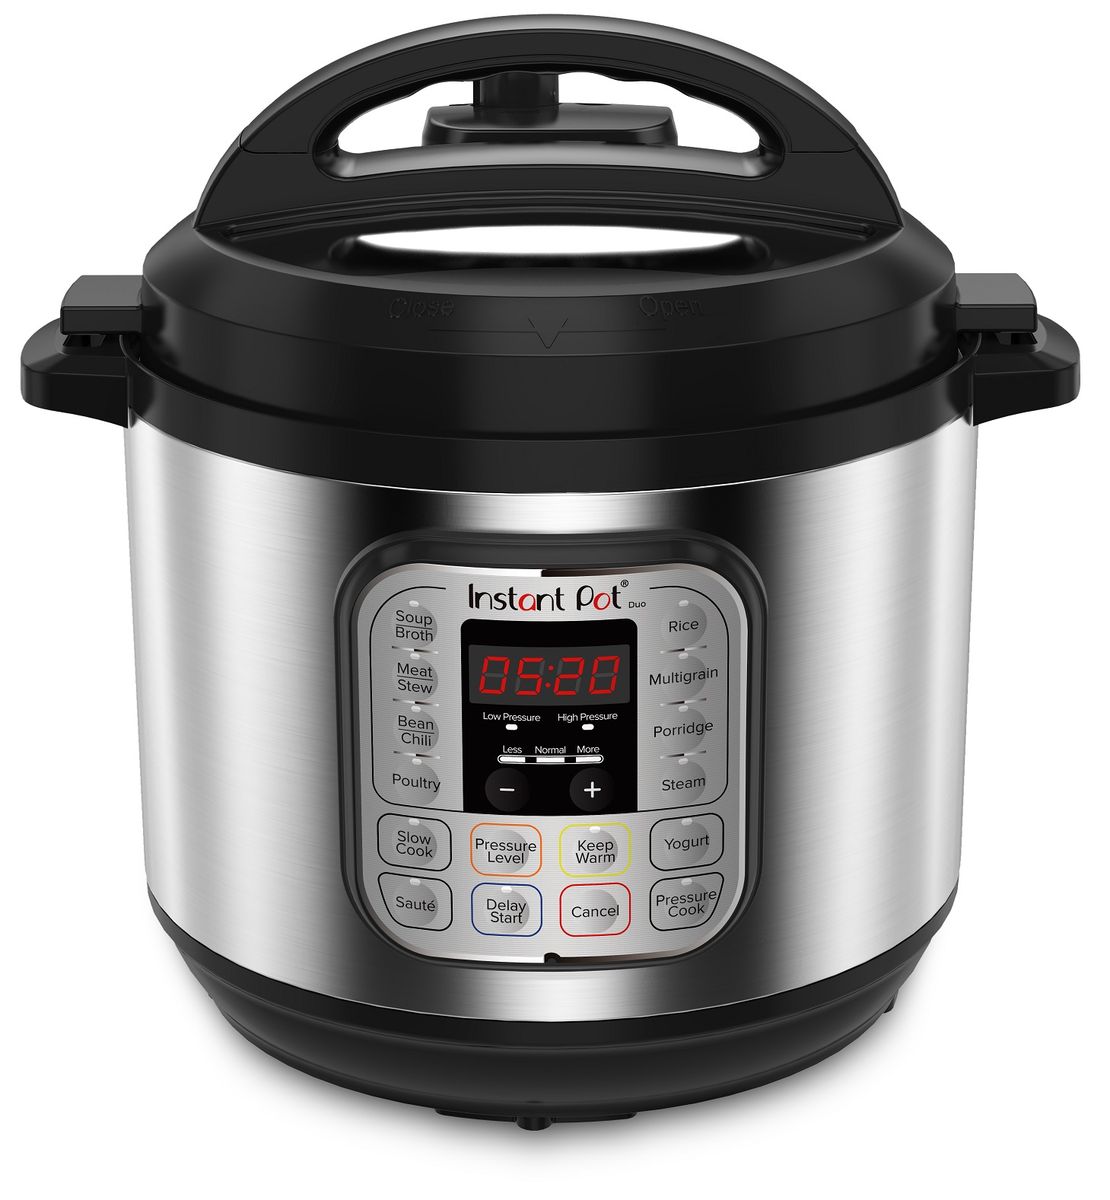 Pressure Cookers - Instant Pot Duo 80 7-in-1 8L Smart Cooker was sold ...